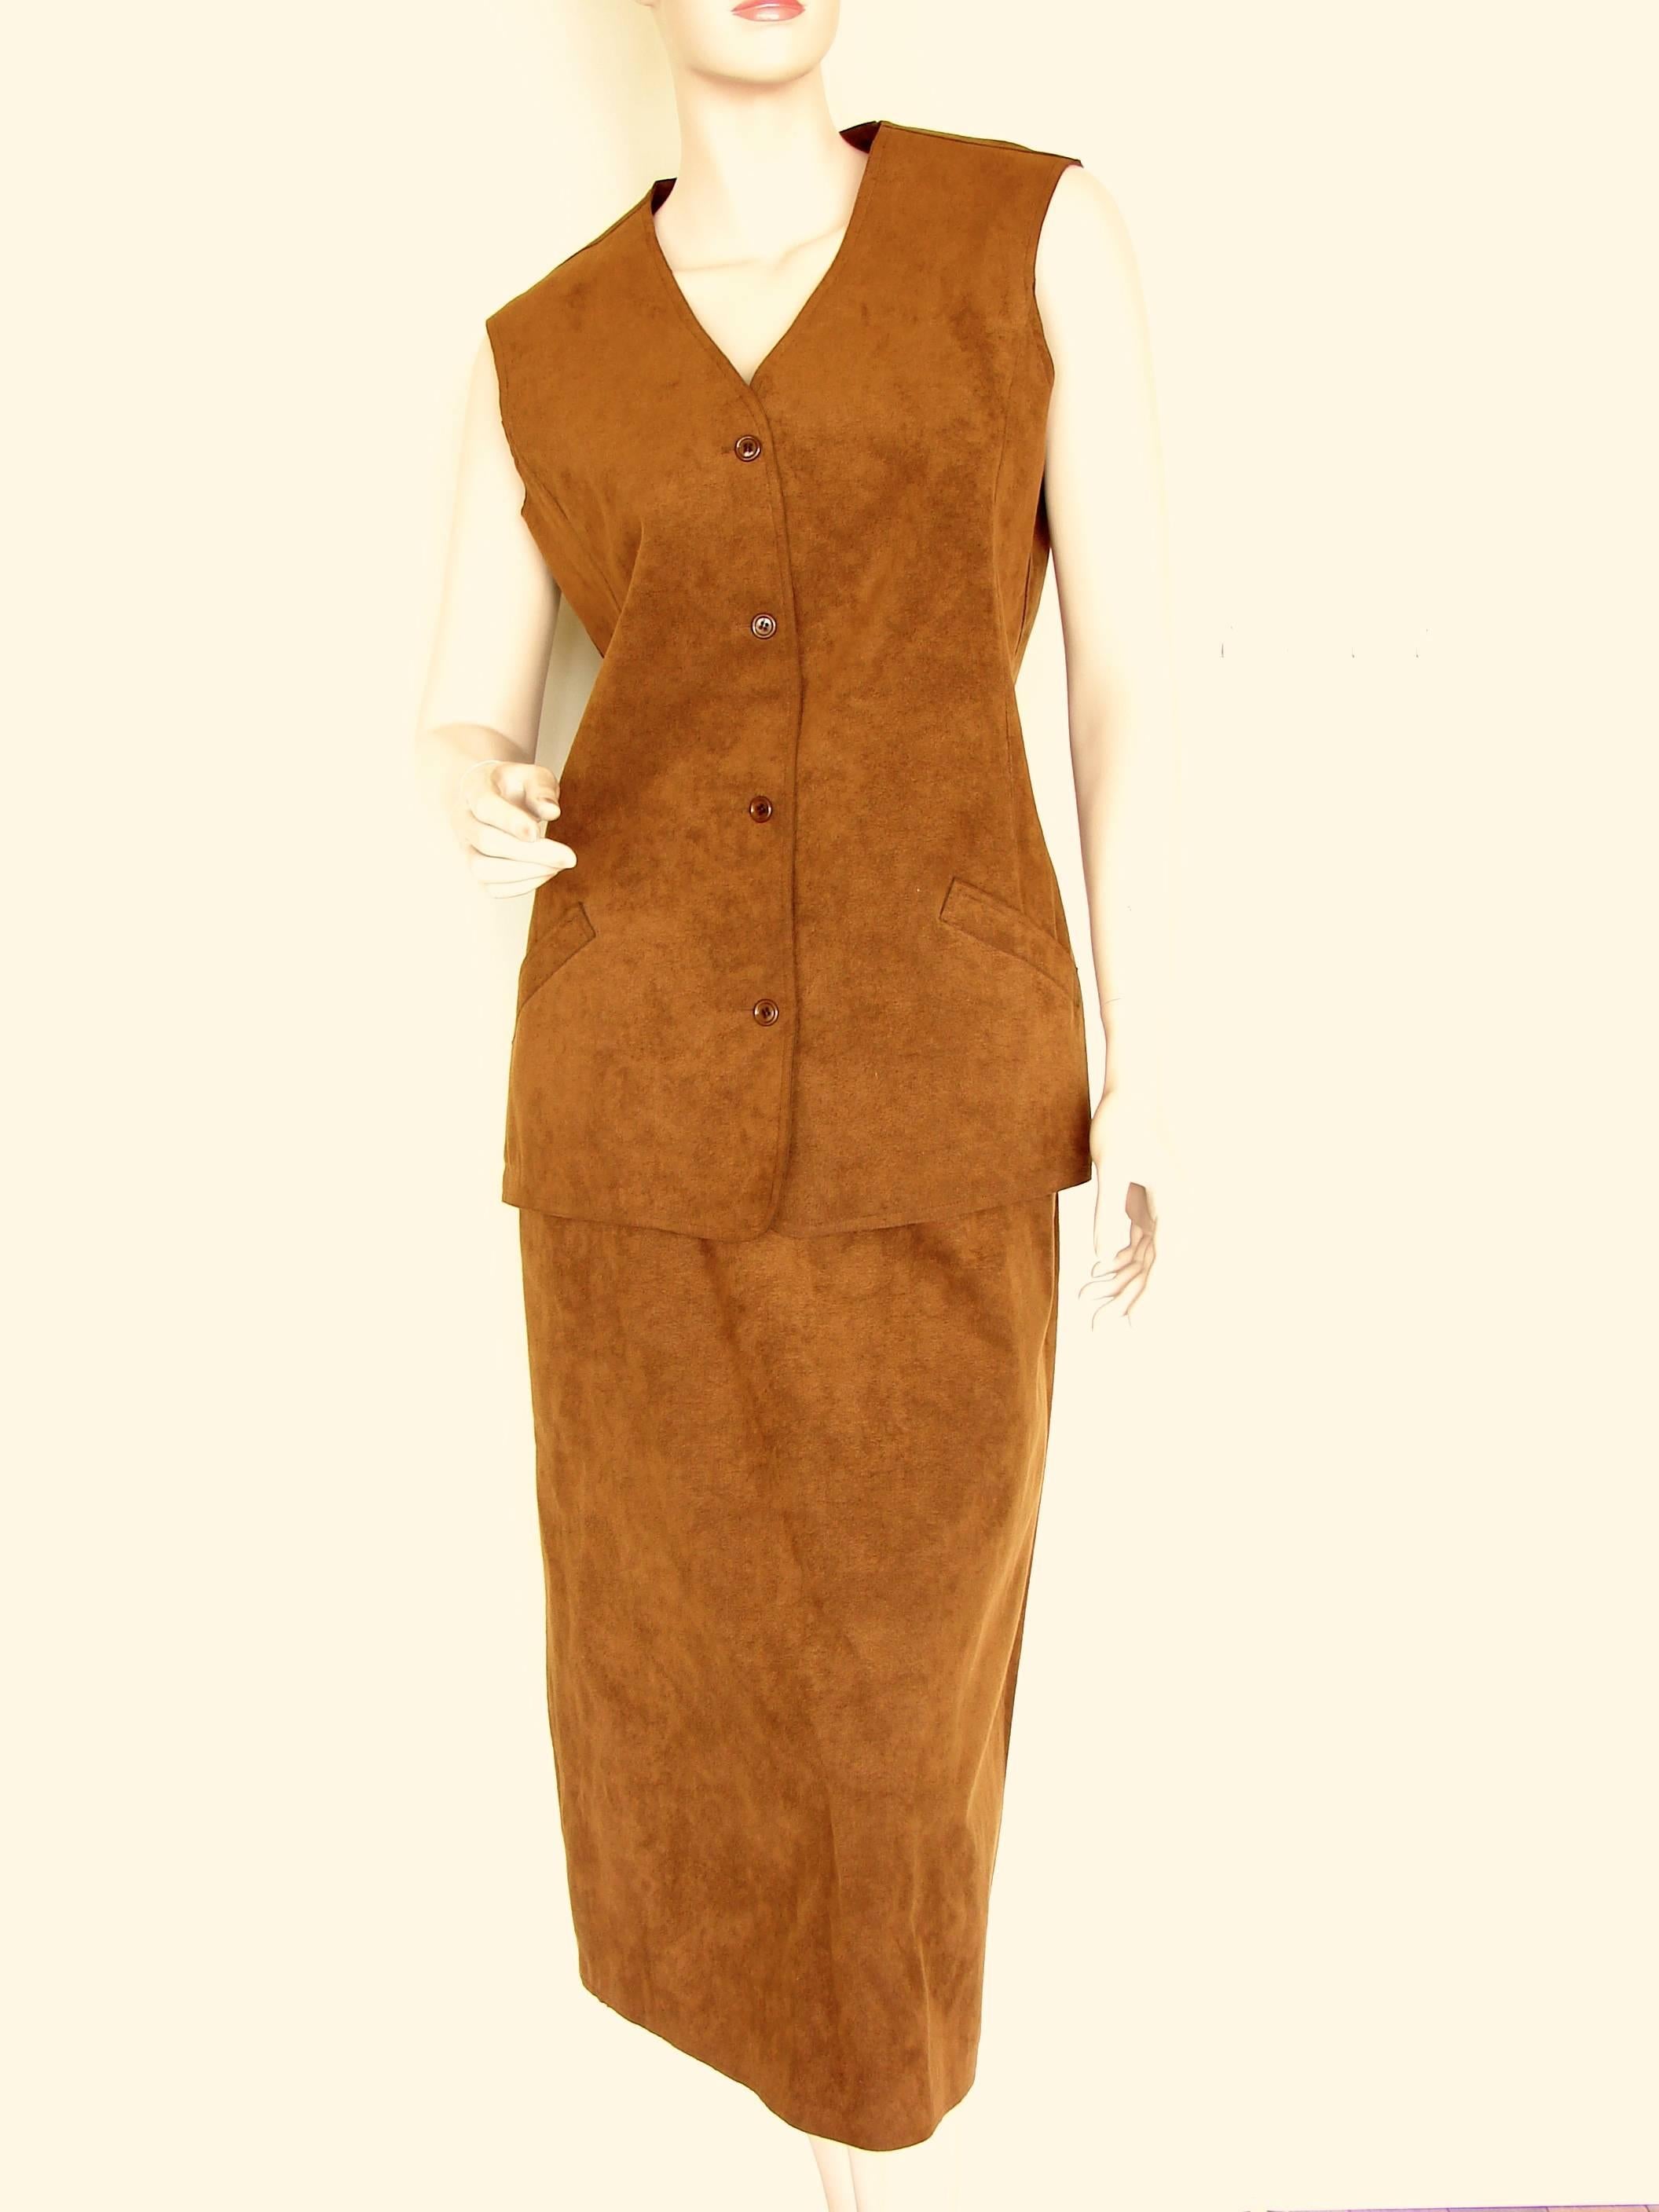 This vintage vest and skirt ensemble was created by Halston in the early 1970s.  In excellent condition, we suspect this set has never been worn (or was worn very gently!)  The vest measures, taken flat and doubled where appropriate: bust - 38